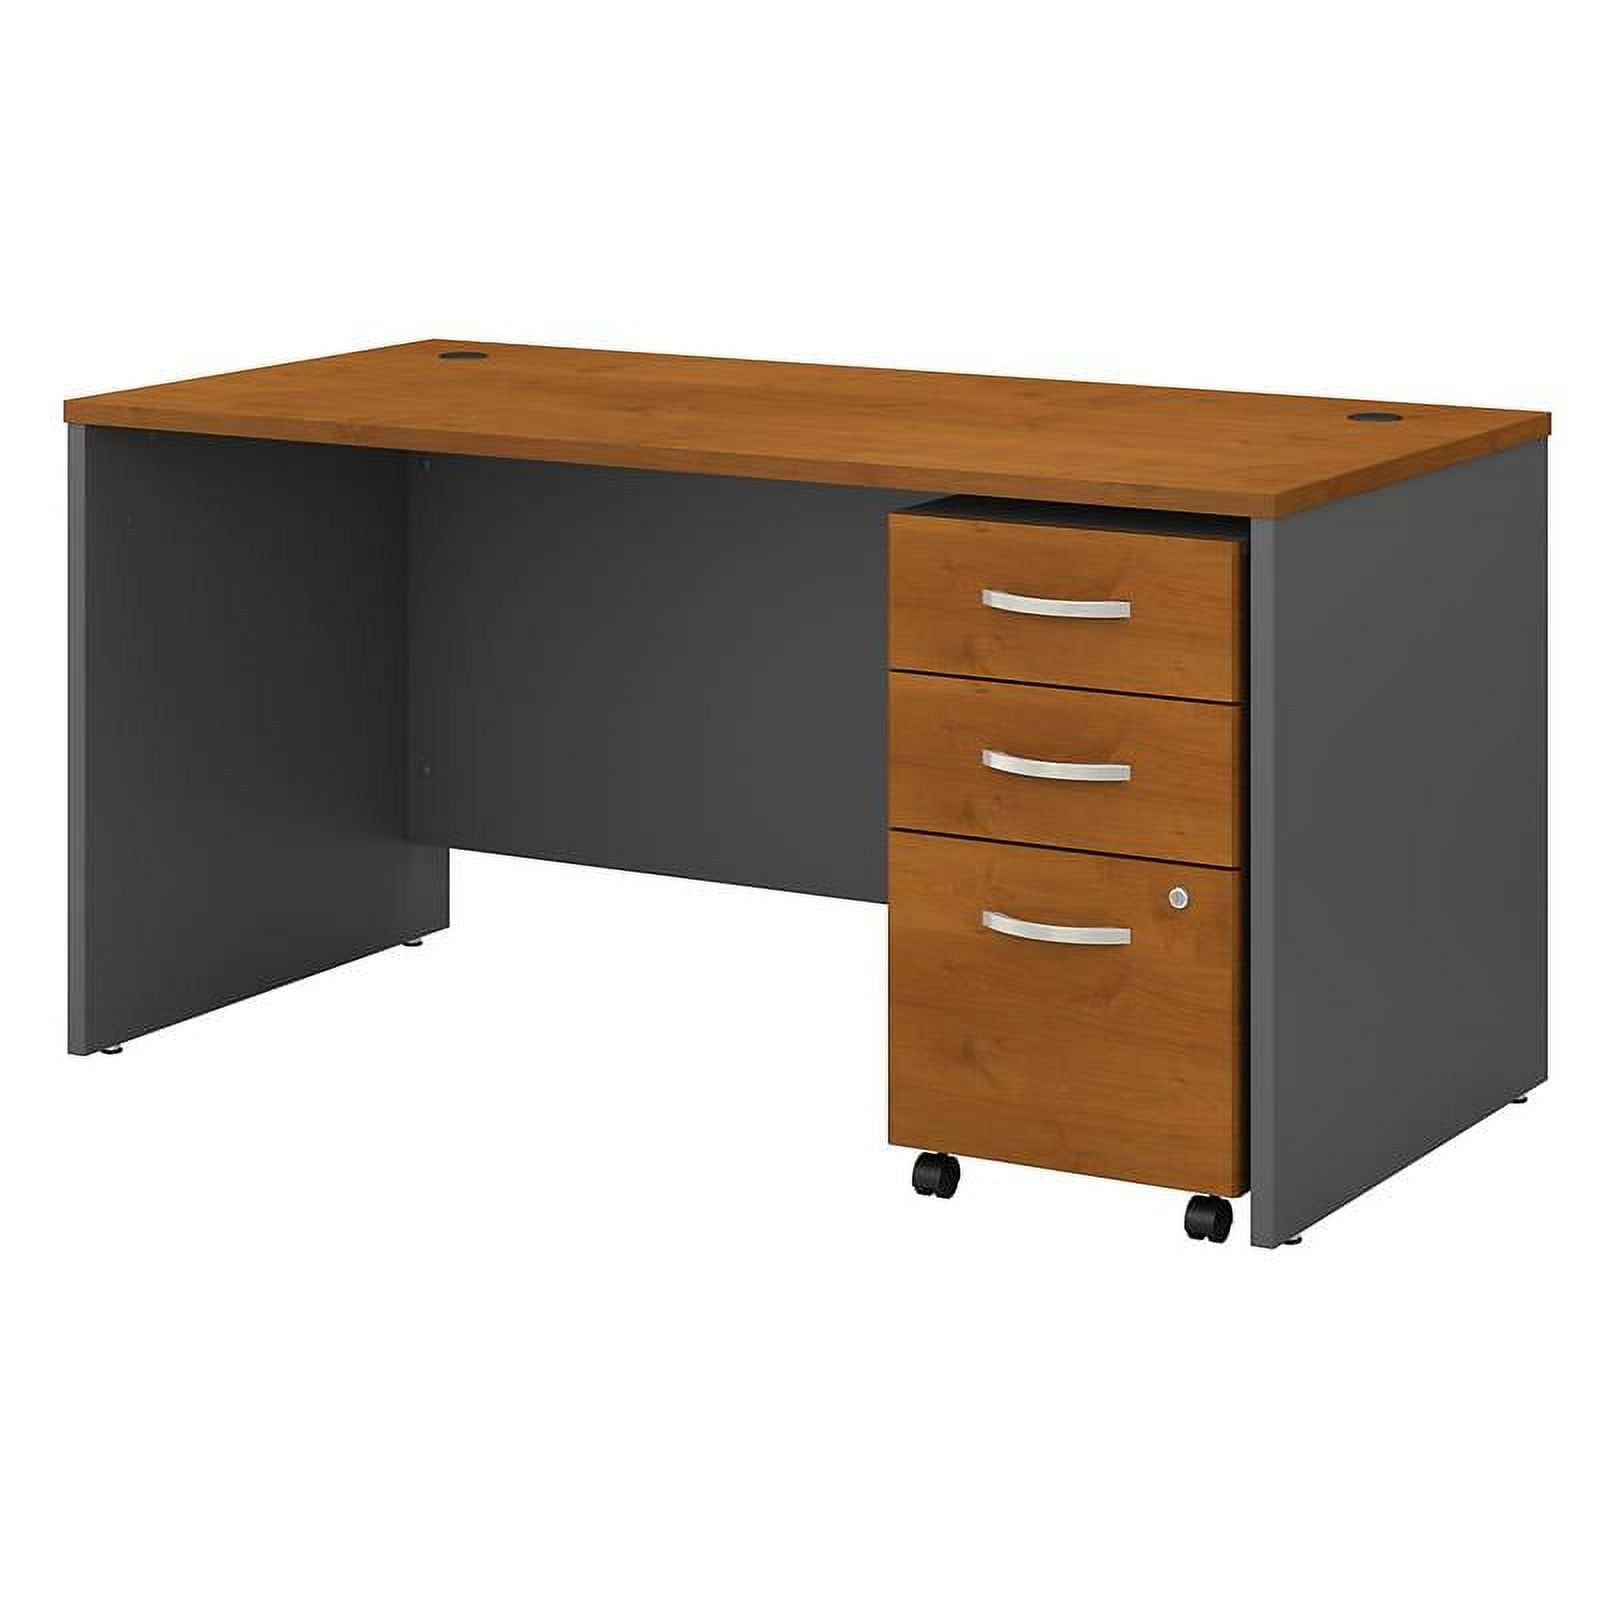 Picture of Bush Business Furniture SRC144NCSU 60 x 30 in. Series C Office Desk with 3 Drawer Mobile File Cabinet, Natural Cherry